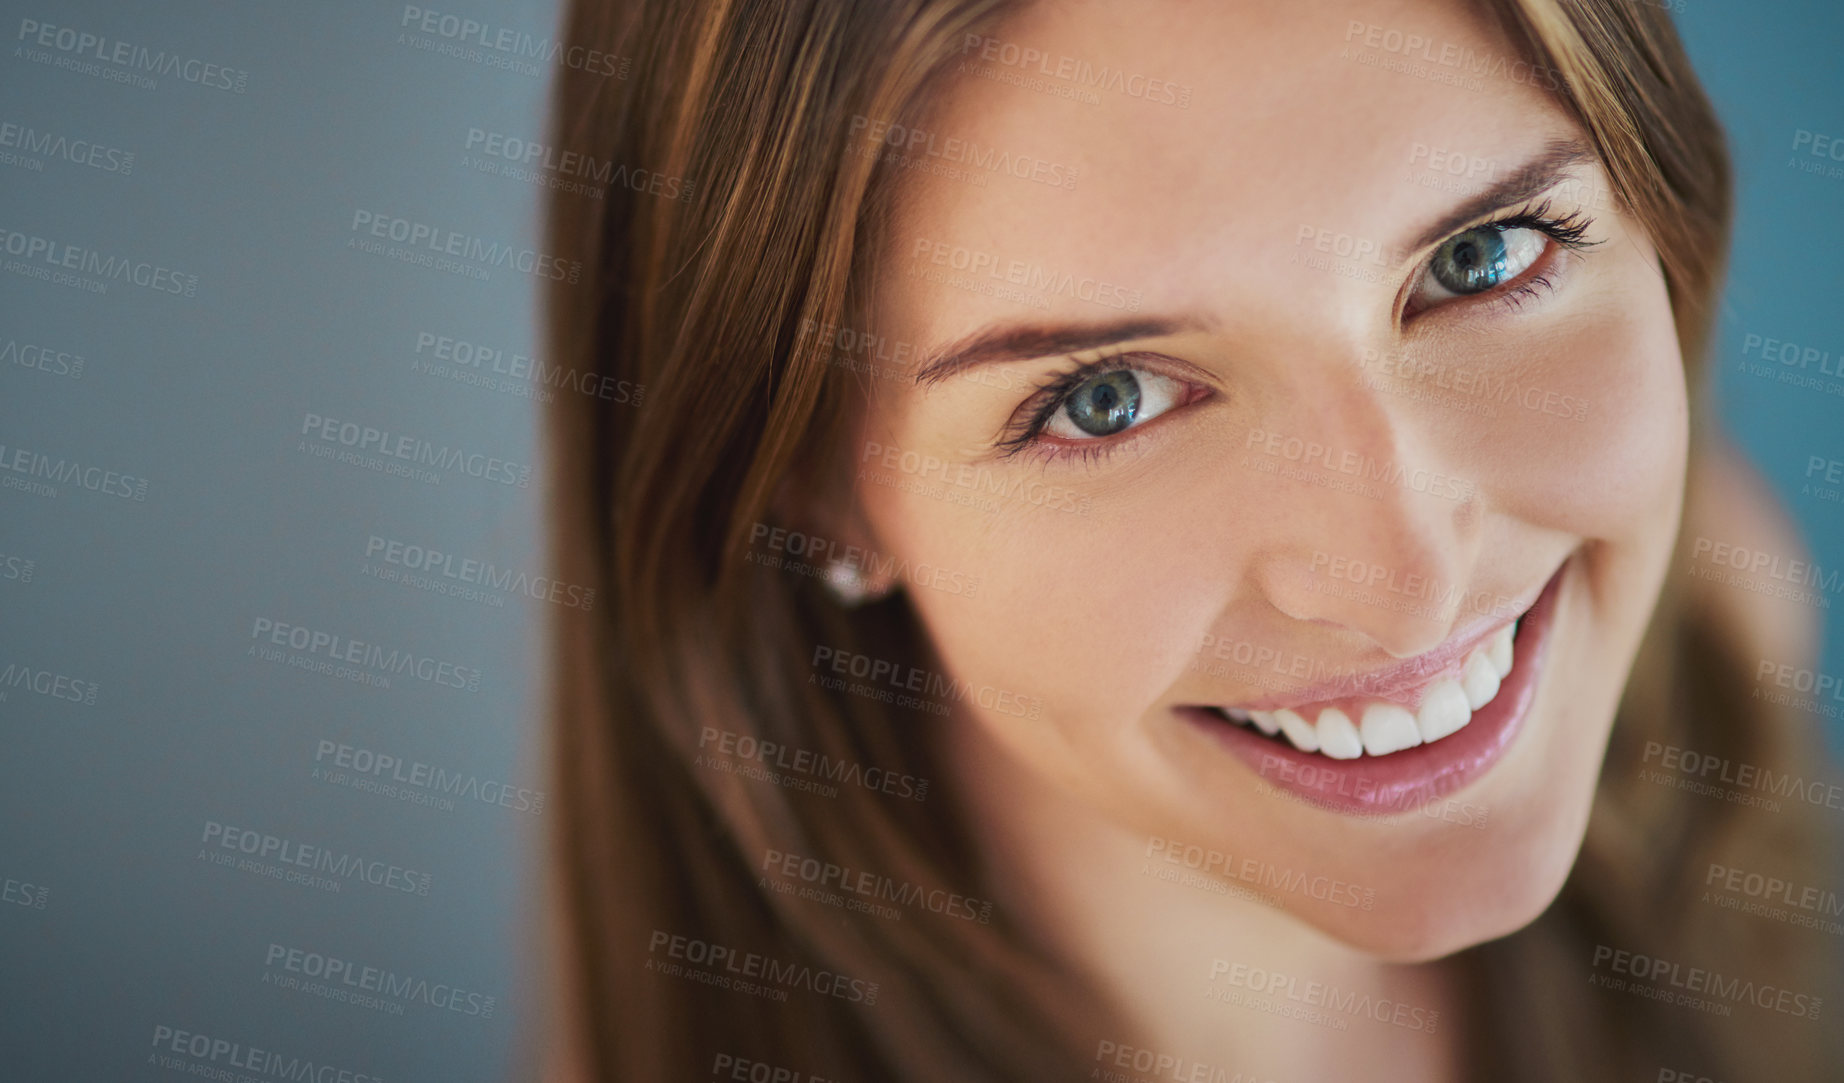 Buy stock photo High angle studio shot of an attractive young woman smiling against a gray background